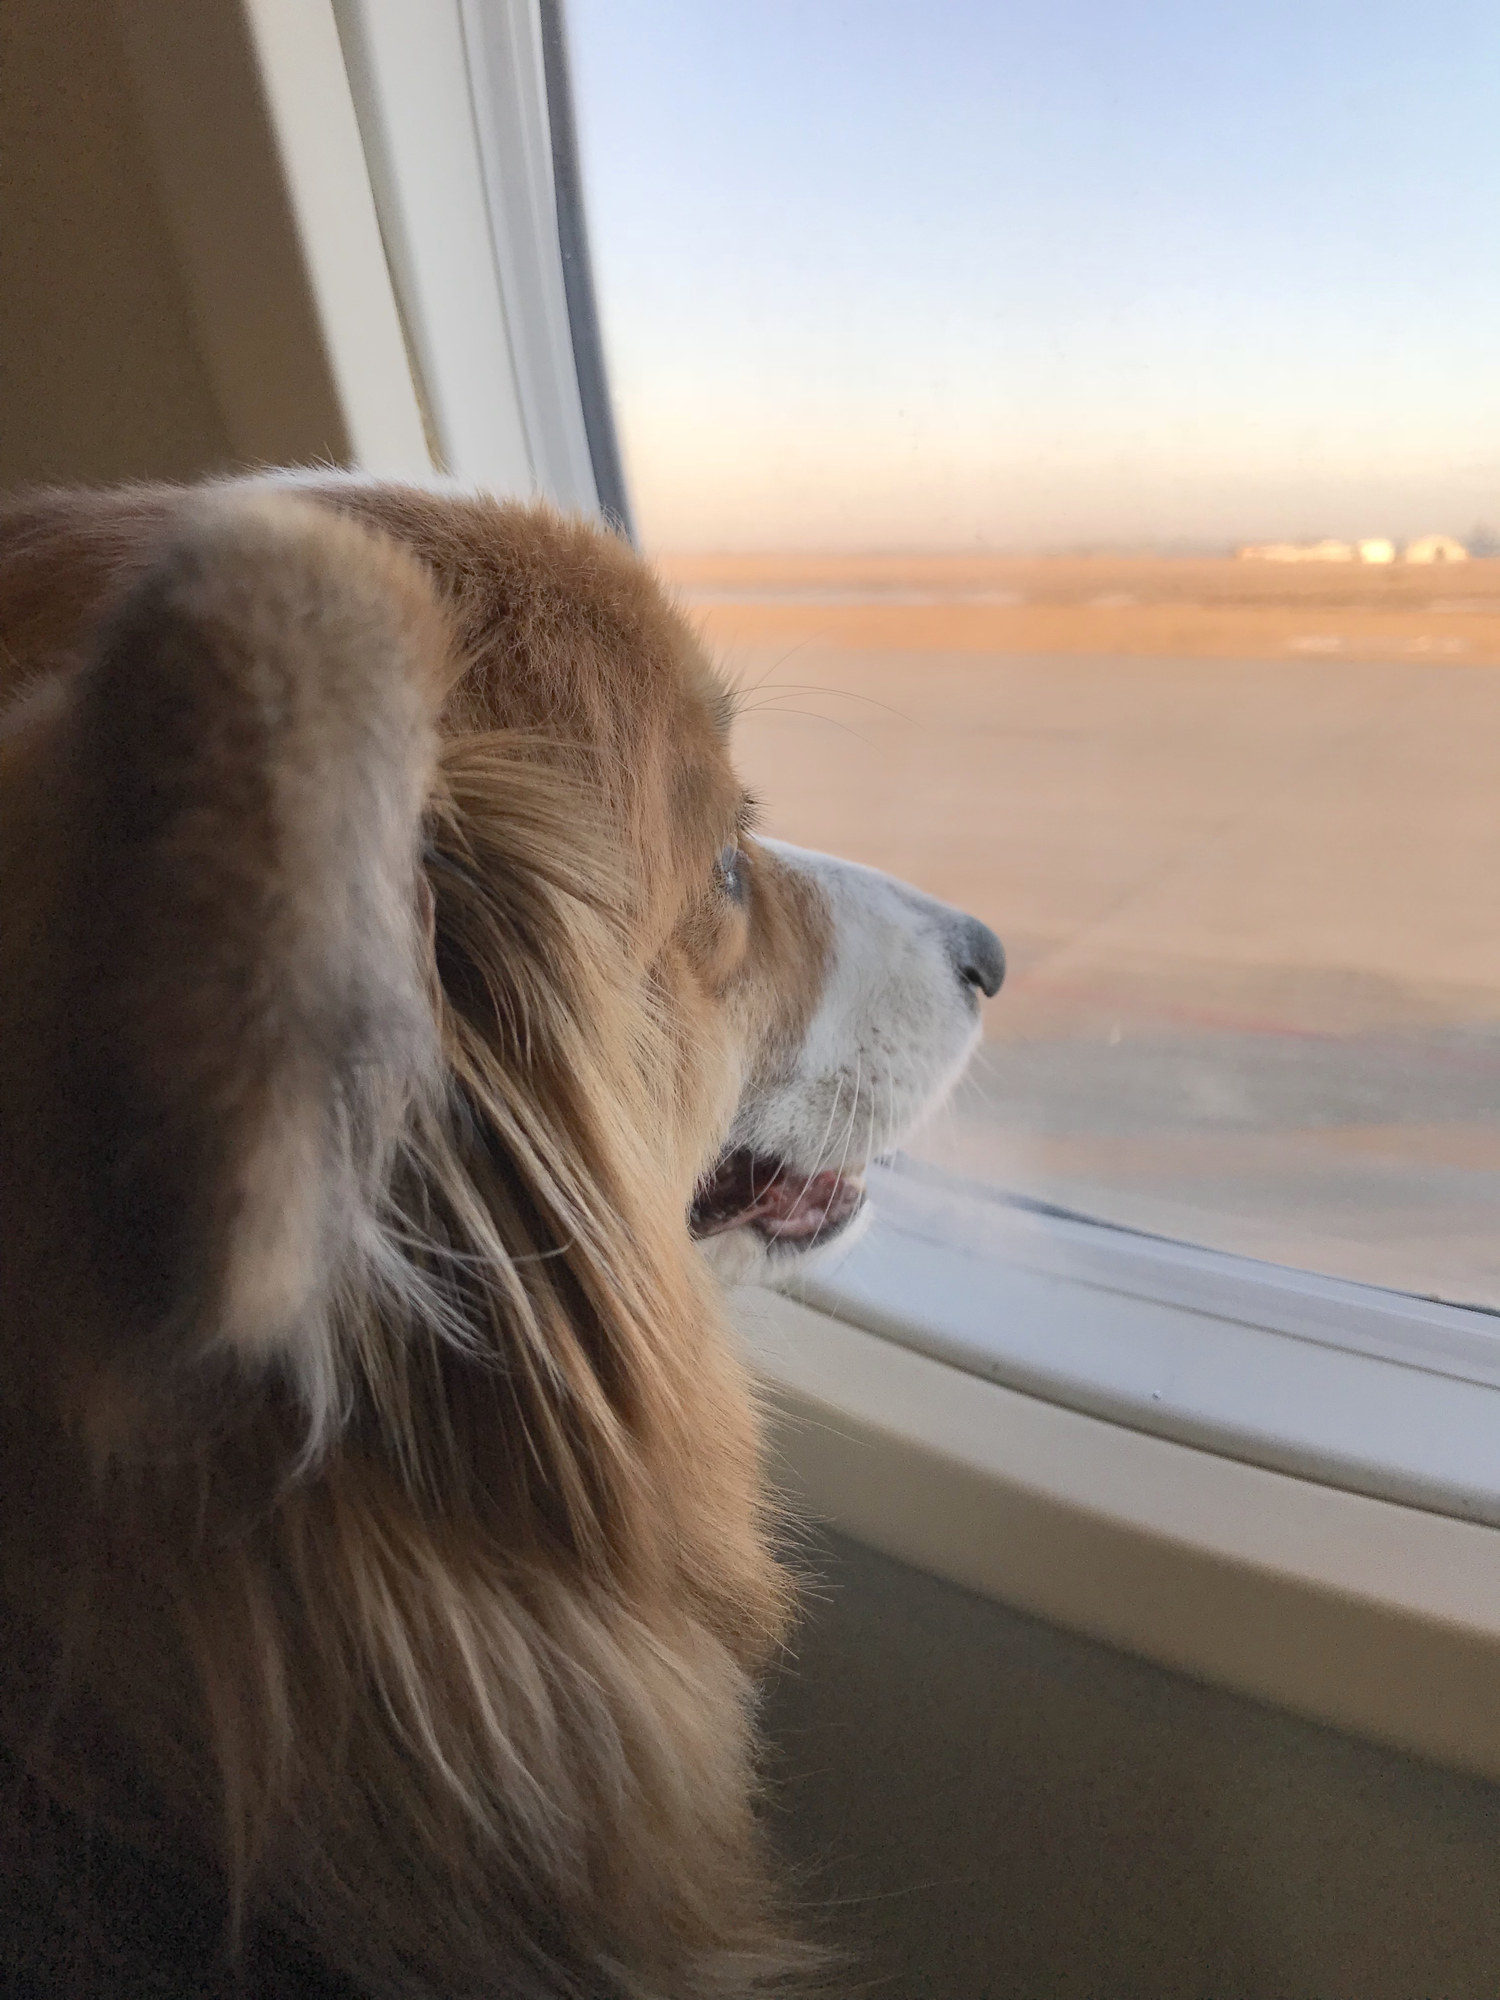 A dog looking out a plane window